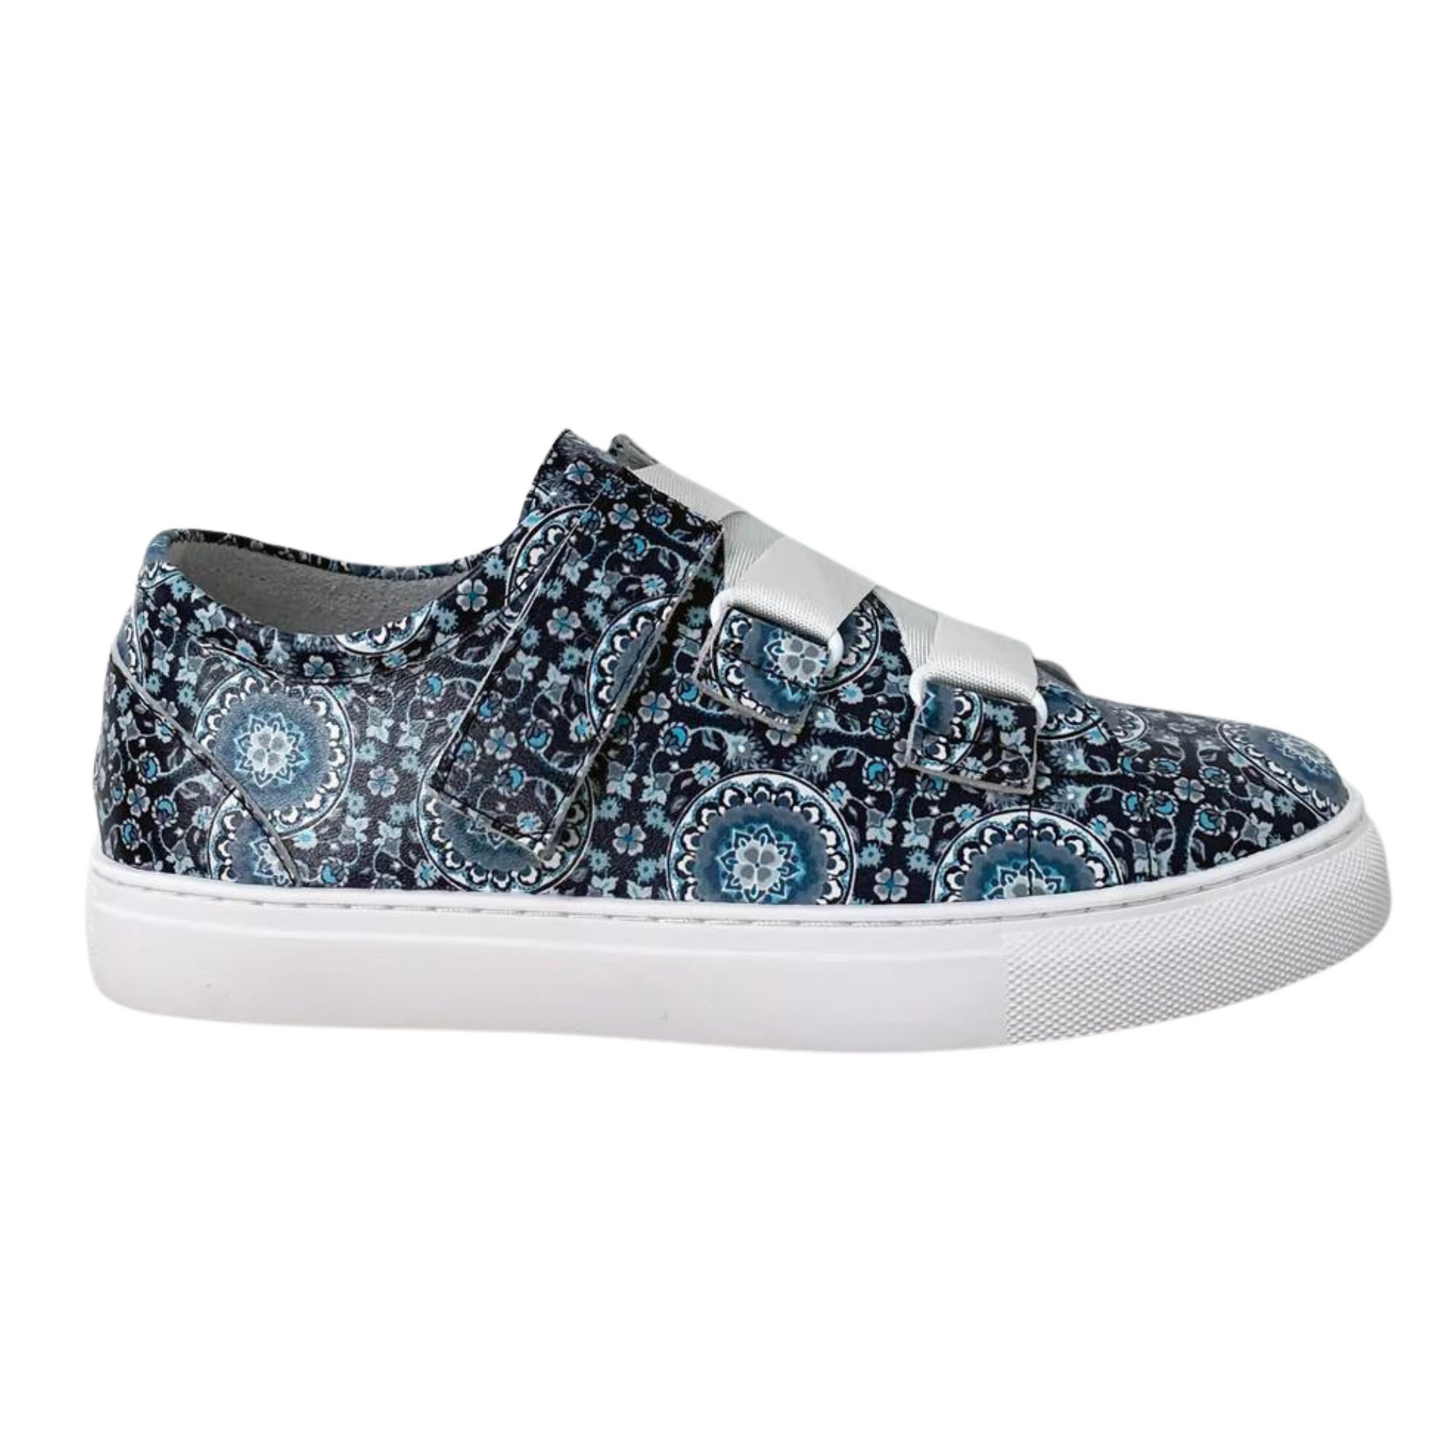 A right side view of a blue patterned sneaker.